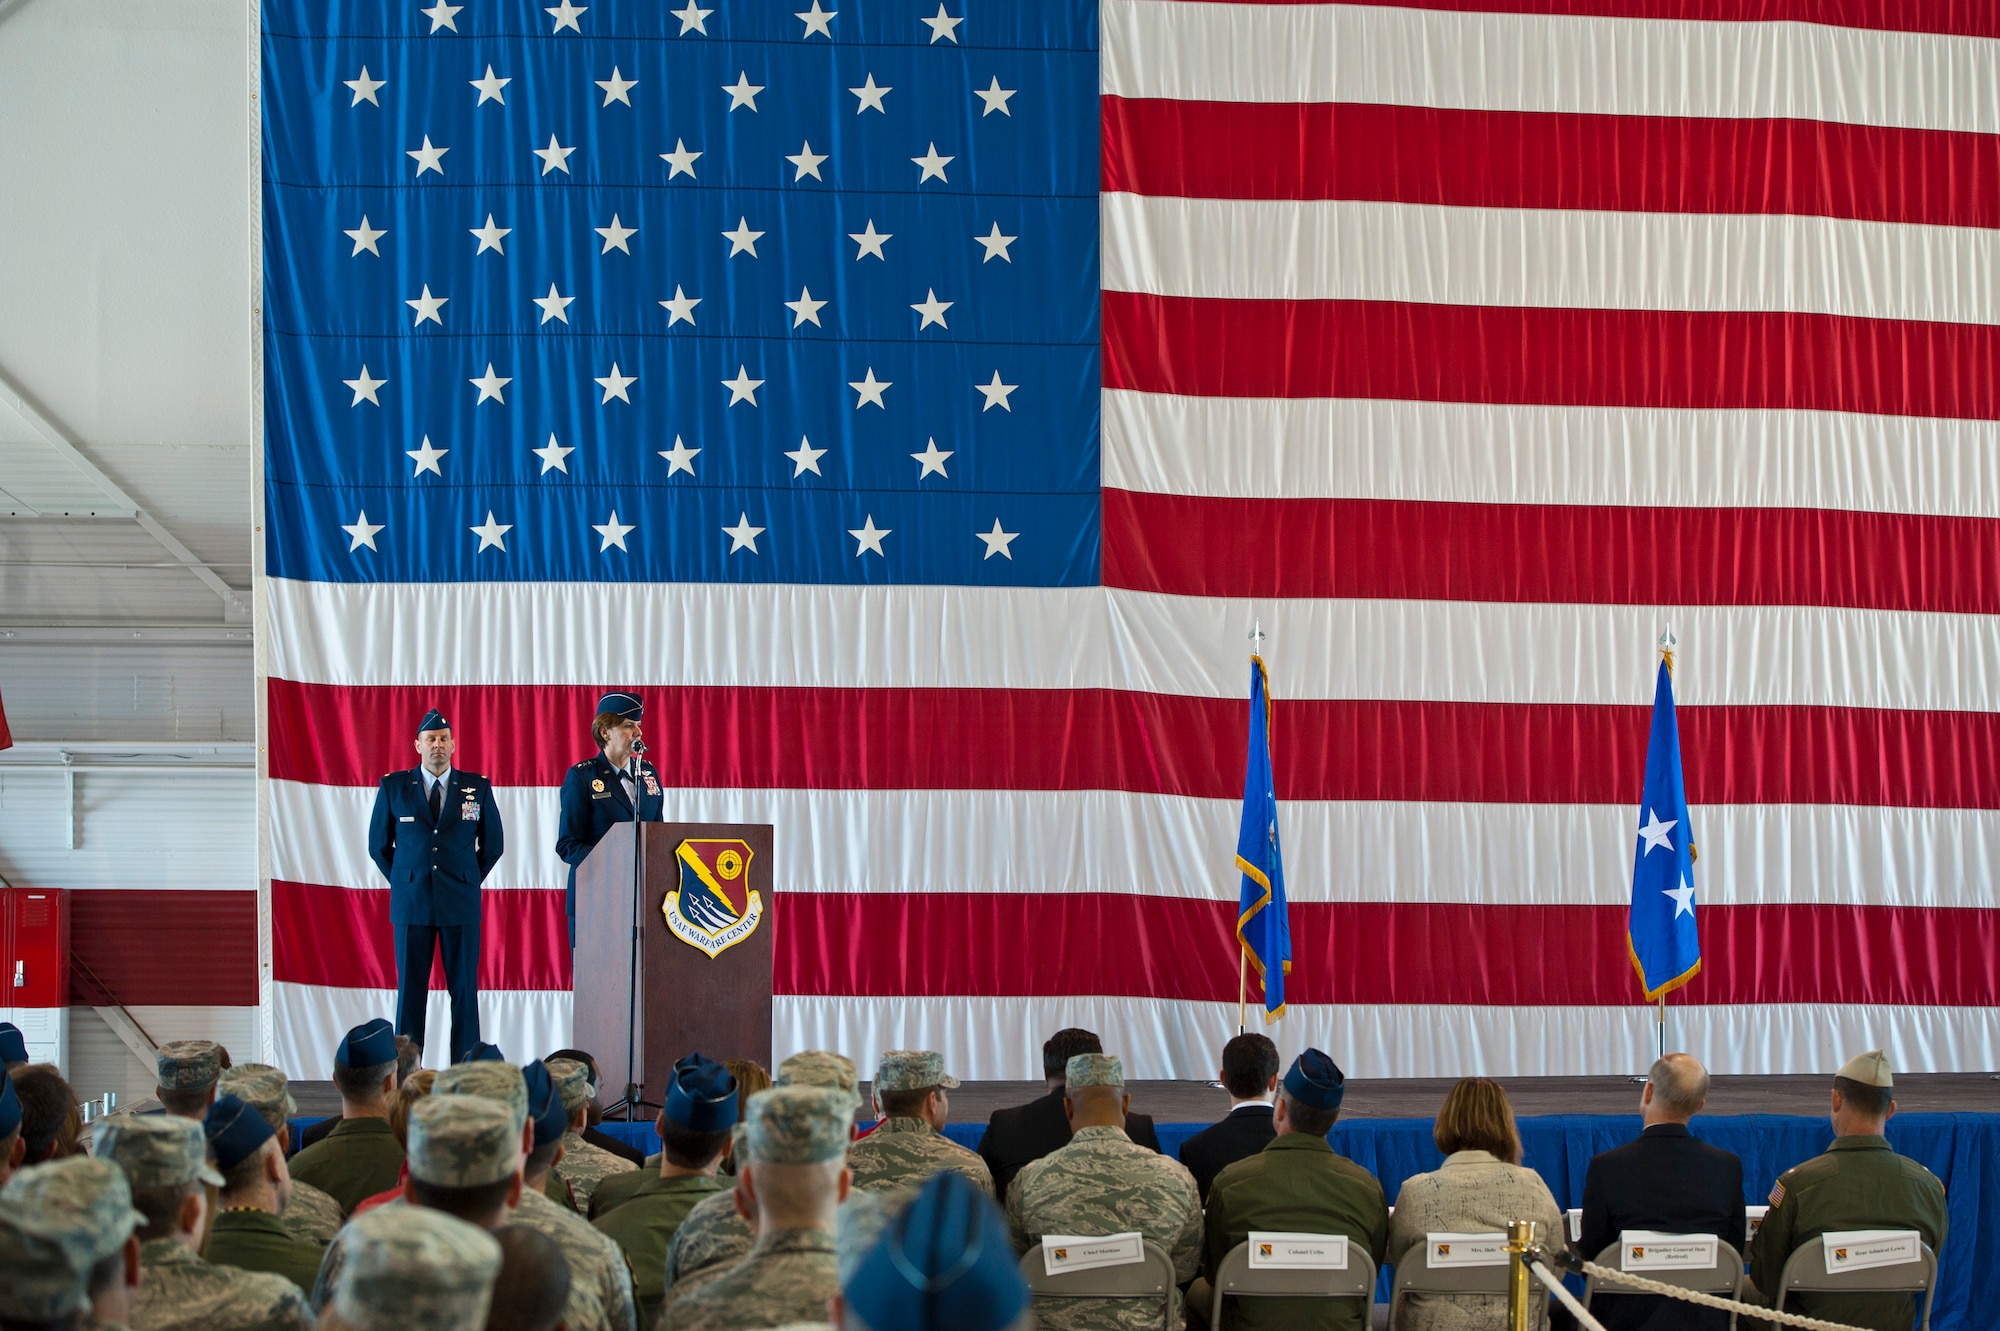 U.S. Air Force Lt. Gen. Lori Robinson, Air Combat Command vice commander, provides opening remarks during an assumption of command ceremony in the Thunderbird hangar Feb. 21, 2014, at Nellis Air Force Base, Nev. Robinson assists the commander in organizing, training, equipping, and maintaining combat-ready forces are ready to meet the challenges of peacetime air sovereignty and wartime defense. (U.S. Air Force photo by Senior Airman Christopher Tam)